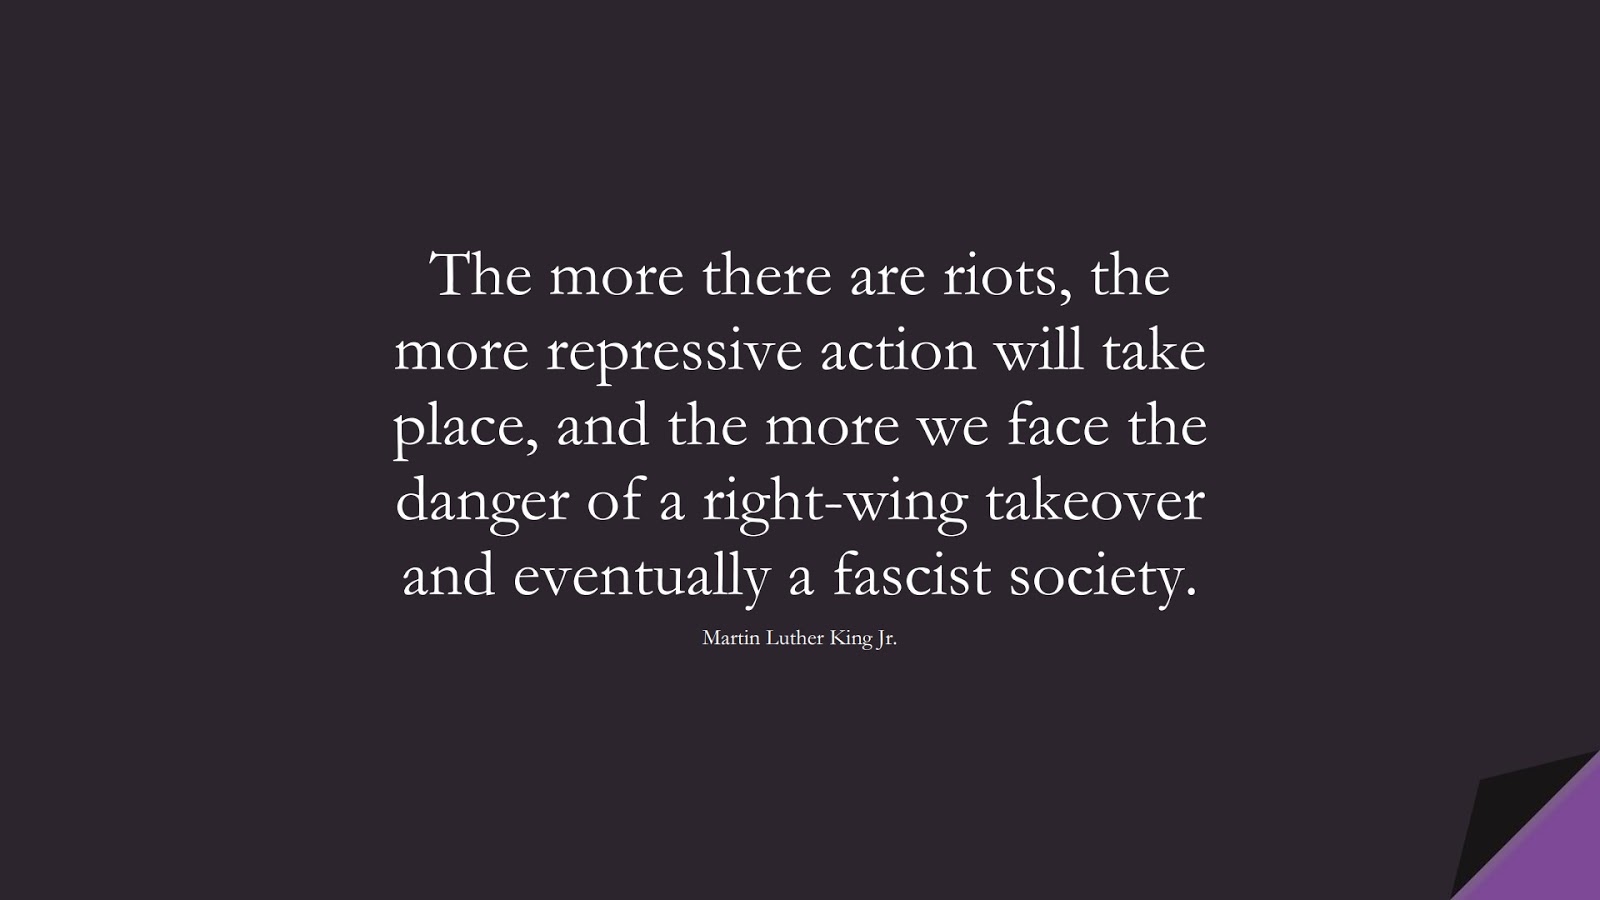 The more there are riots, the more repressive action will take place, and the more we face the danger of a right-wing takeover and eventually a fascist society. (Martin Luther King Jr.);  #MartinLutherKingJrQuotes